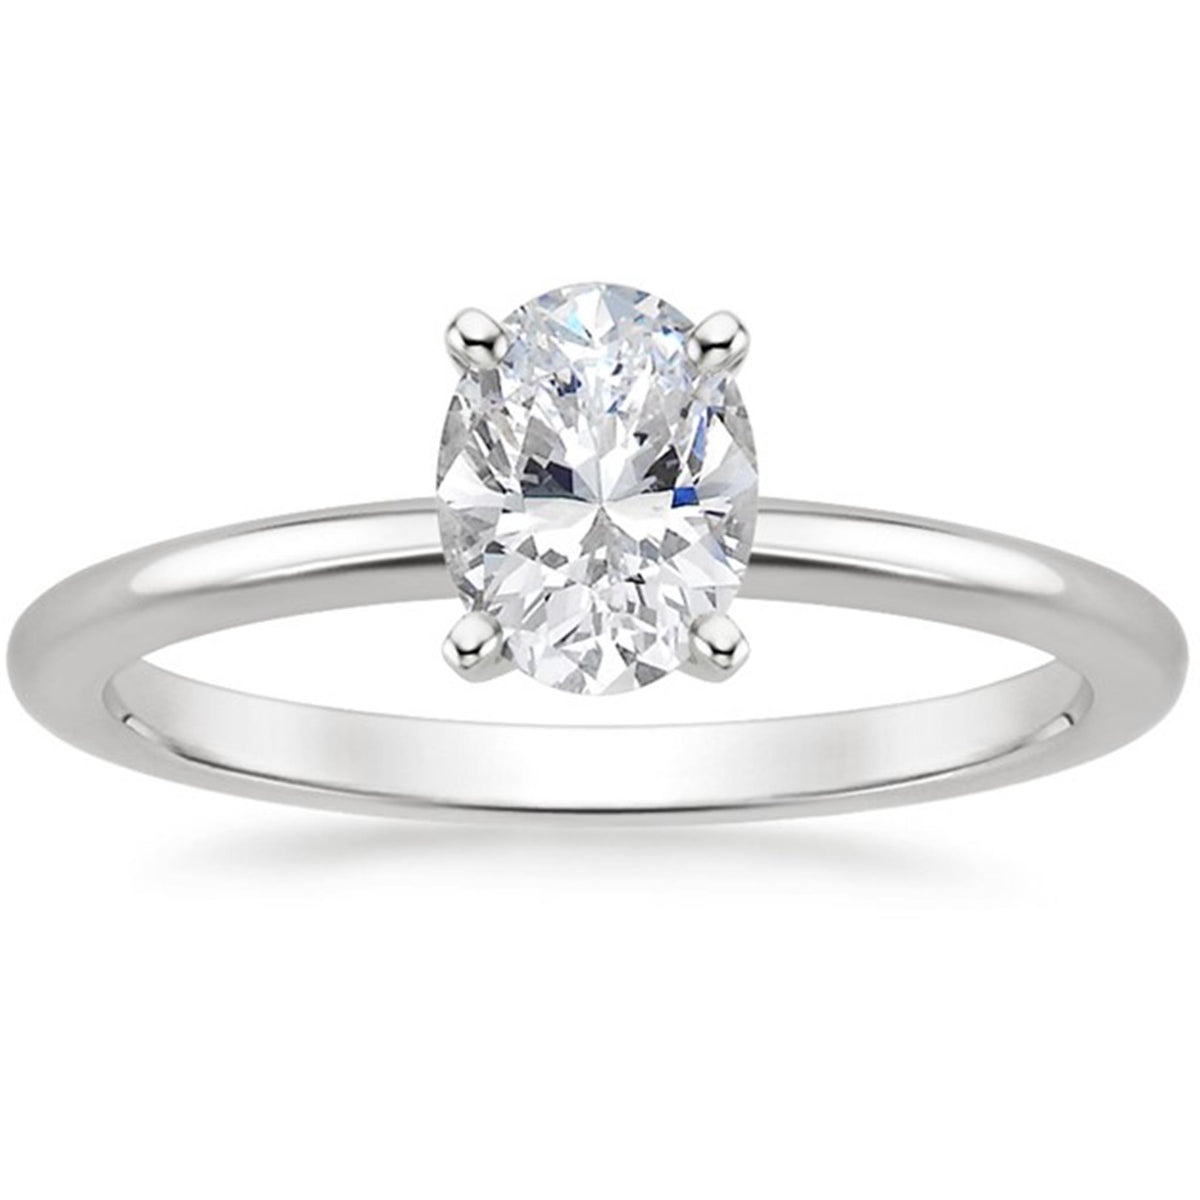 14Kt White Gold Solitaire Ring With 0.37ct Oval Natural Center Diamond